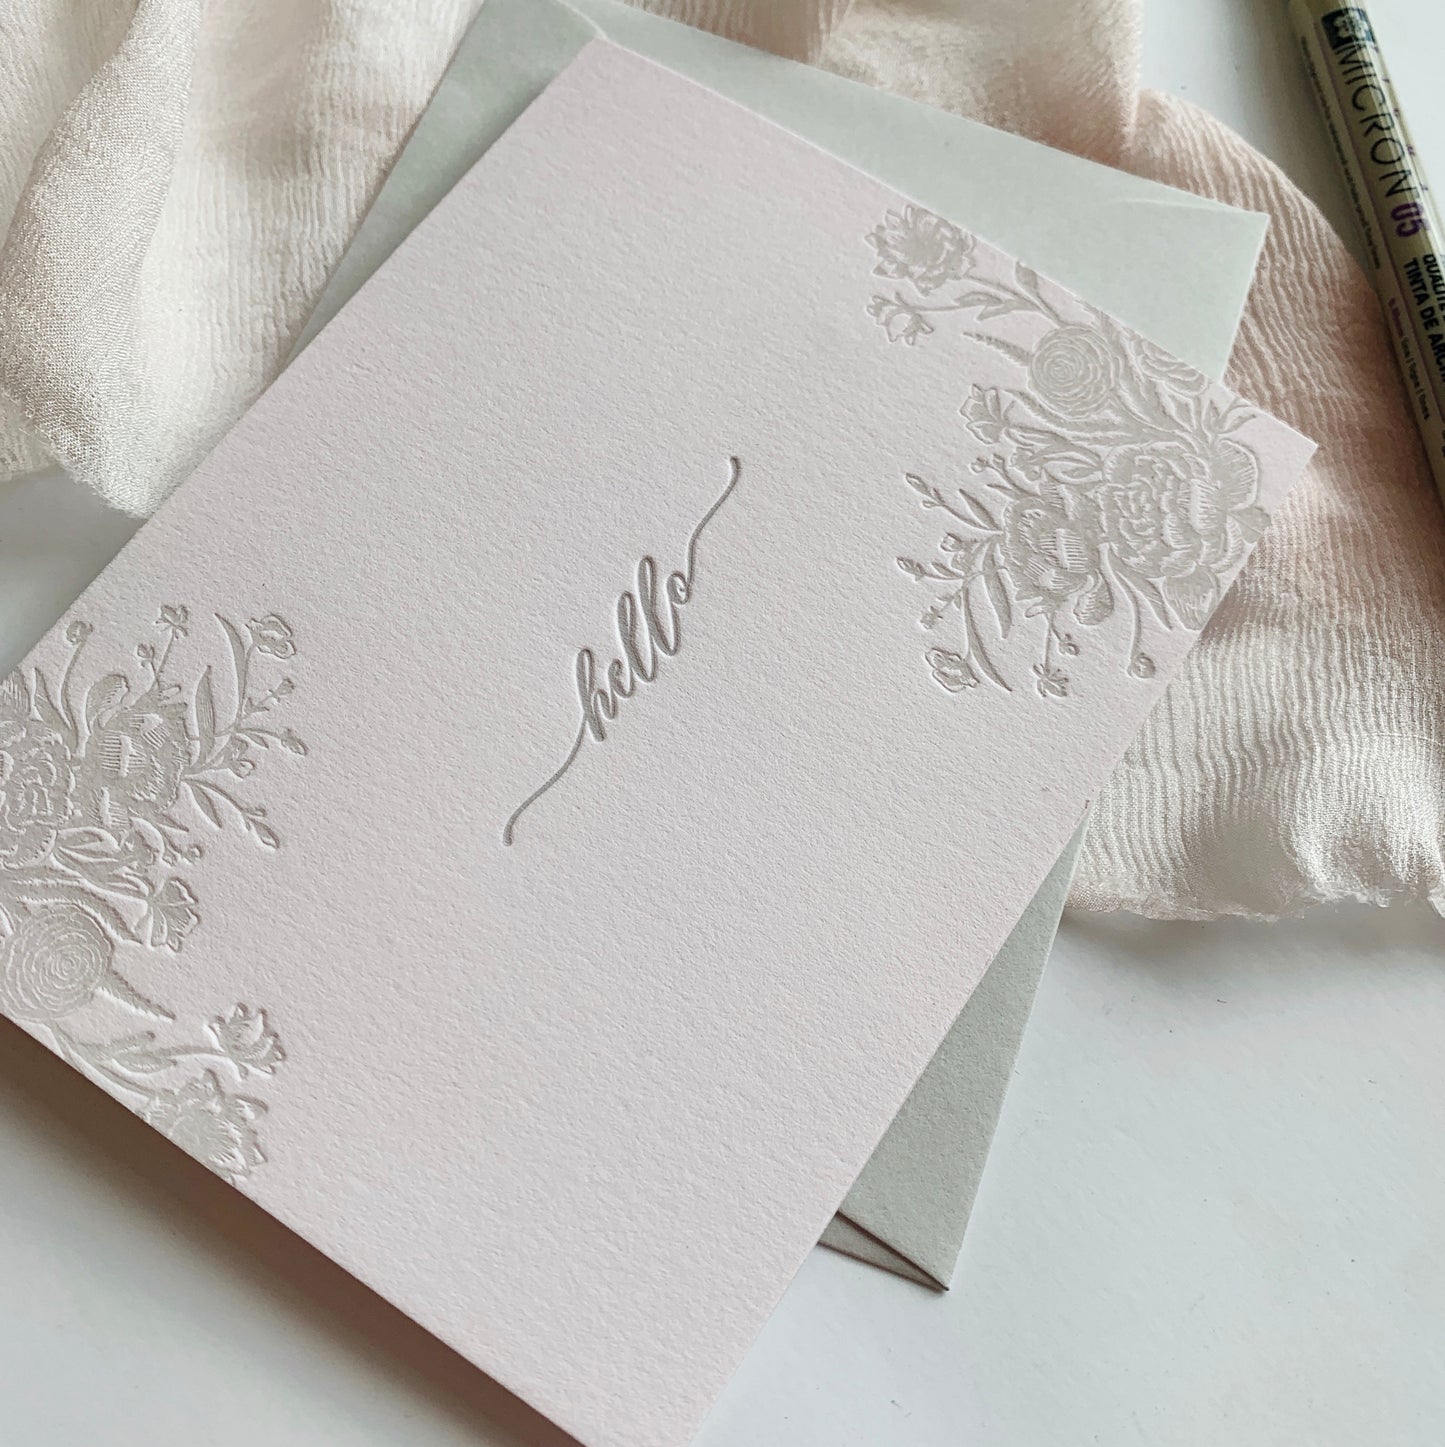 Letterpress greeting card with florals that says "Hello" by Rust Belt Love.